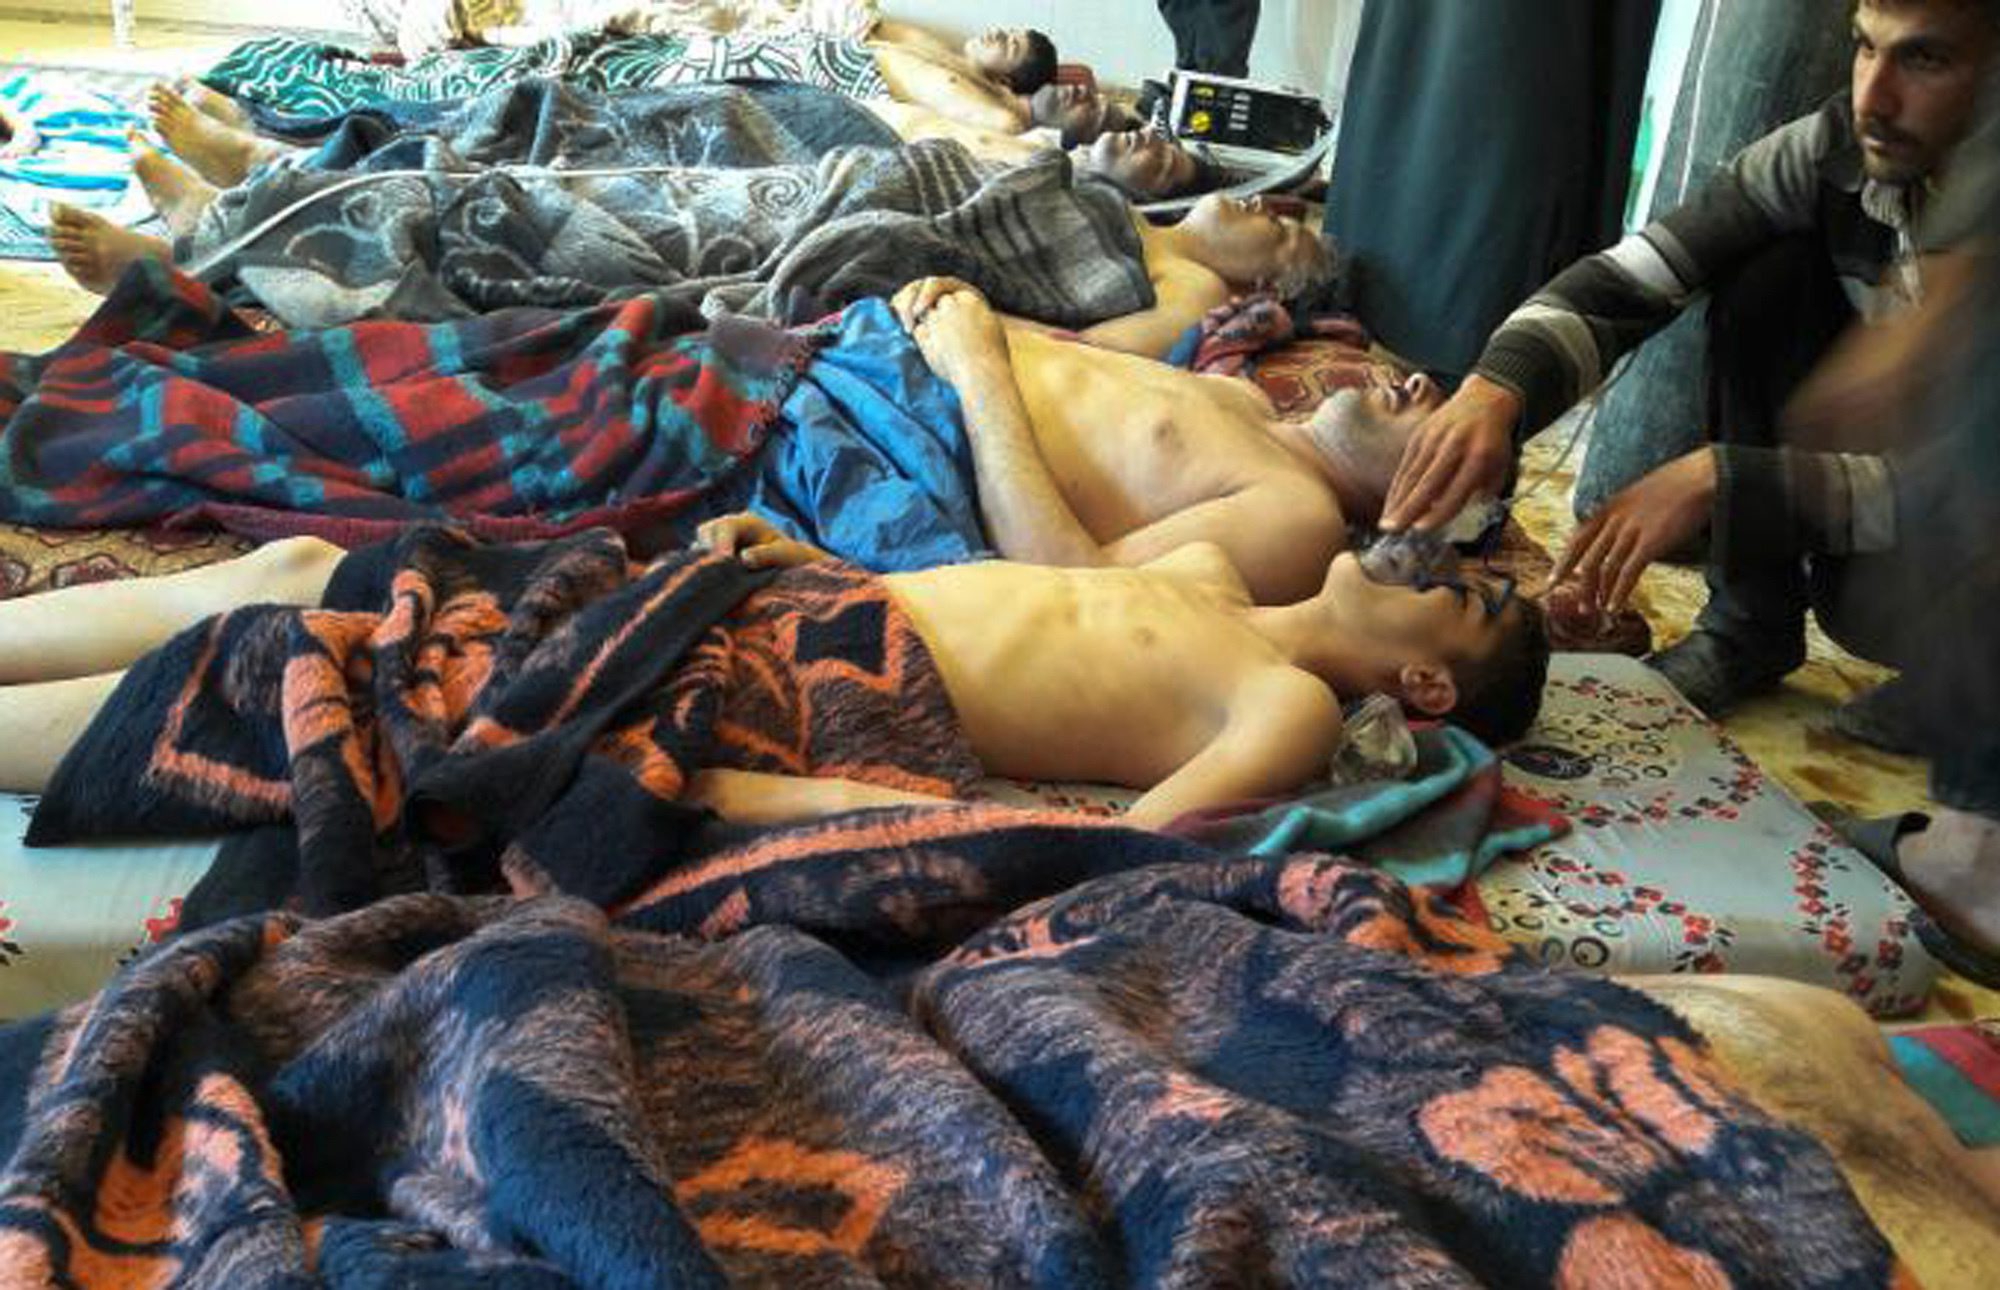 FILE -- In this Tuesday, April 4, 2017 file photo, victims of the suspected chemical weapons attack lie on the ground, in Khan Sheikhoun, in the northern province of Idlib, Syria. France's foreign minister says chemical analysis of samples taken from a deadly sarin gas attack in Syria shows that the nerve agent used "bears the signature" of President Bashar Assad's government and shows it was responsible. Jean-Marc Ayrault says France now knows "from sure sources" that "the manufacturing process of the sarin that was sampled is typical of the method developed in Syrian laboratories." But Kremlin promptly denounced the French report. (Alaa Alyousef via AP, File) Syria